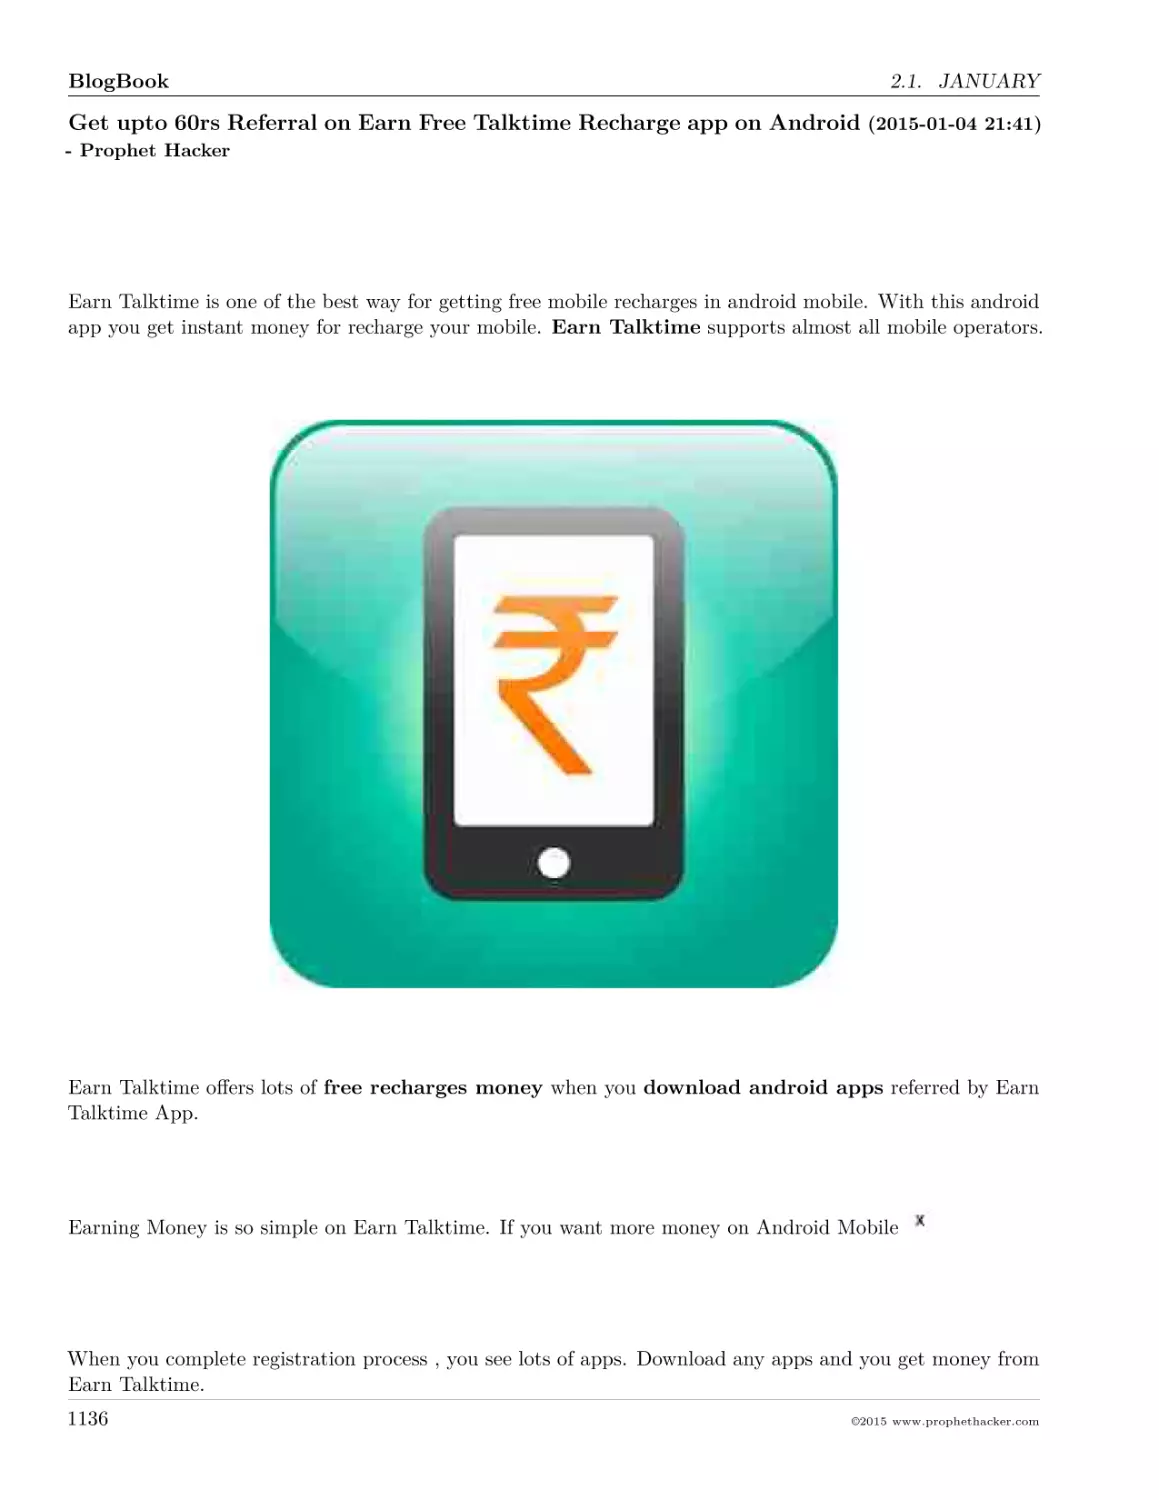 Get upto 60rs Referral on Earn Free Talktime Recharge app on Android (2015-01-04 21